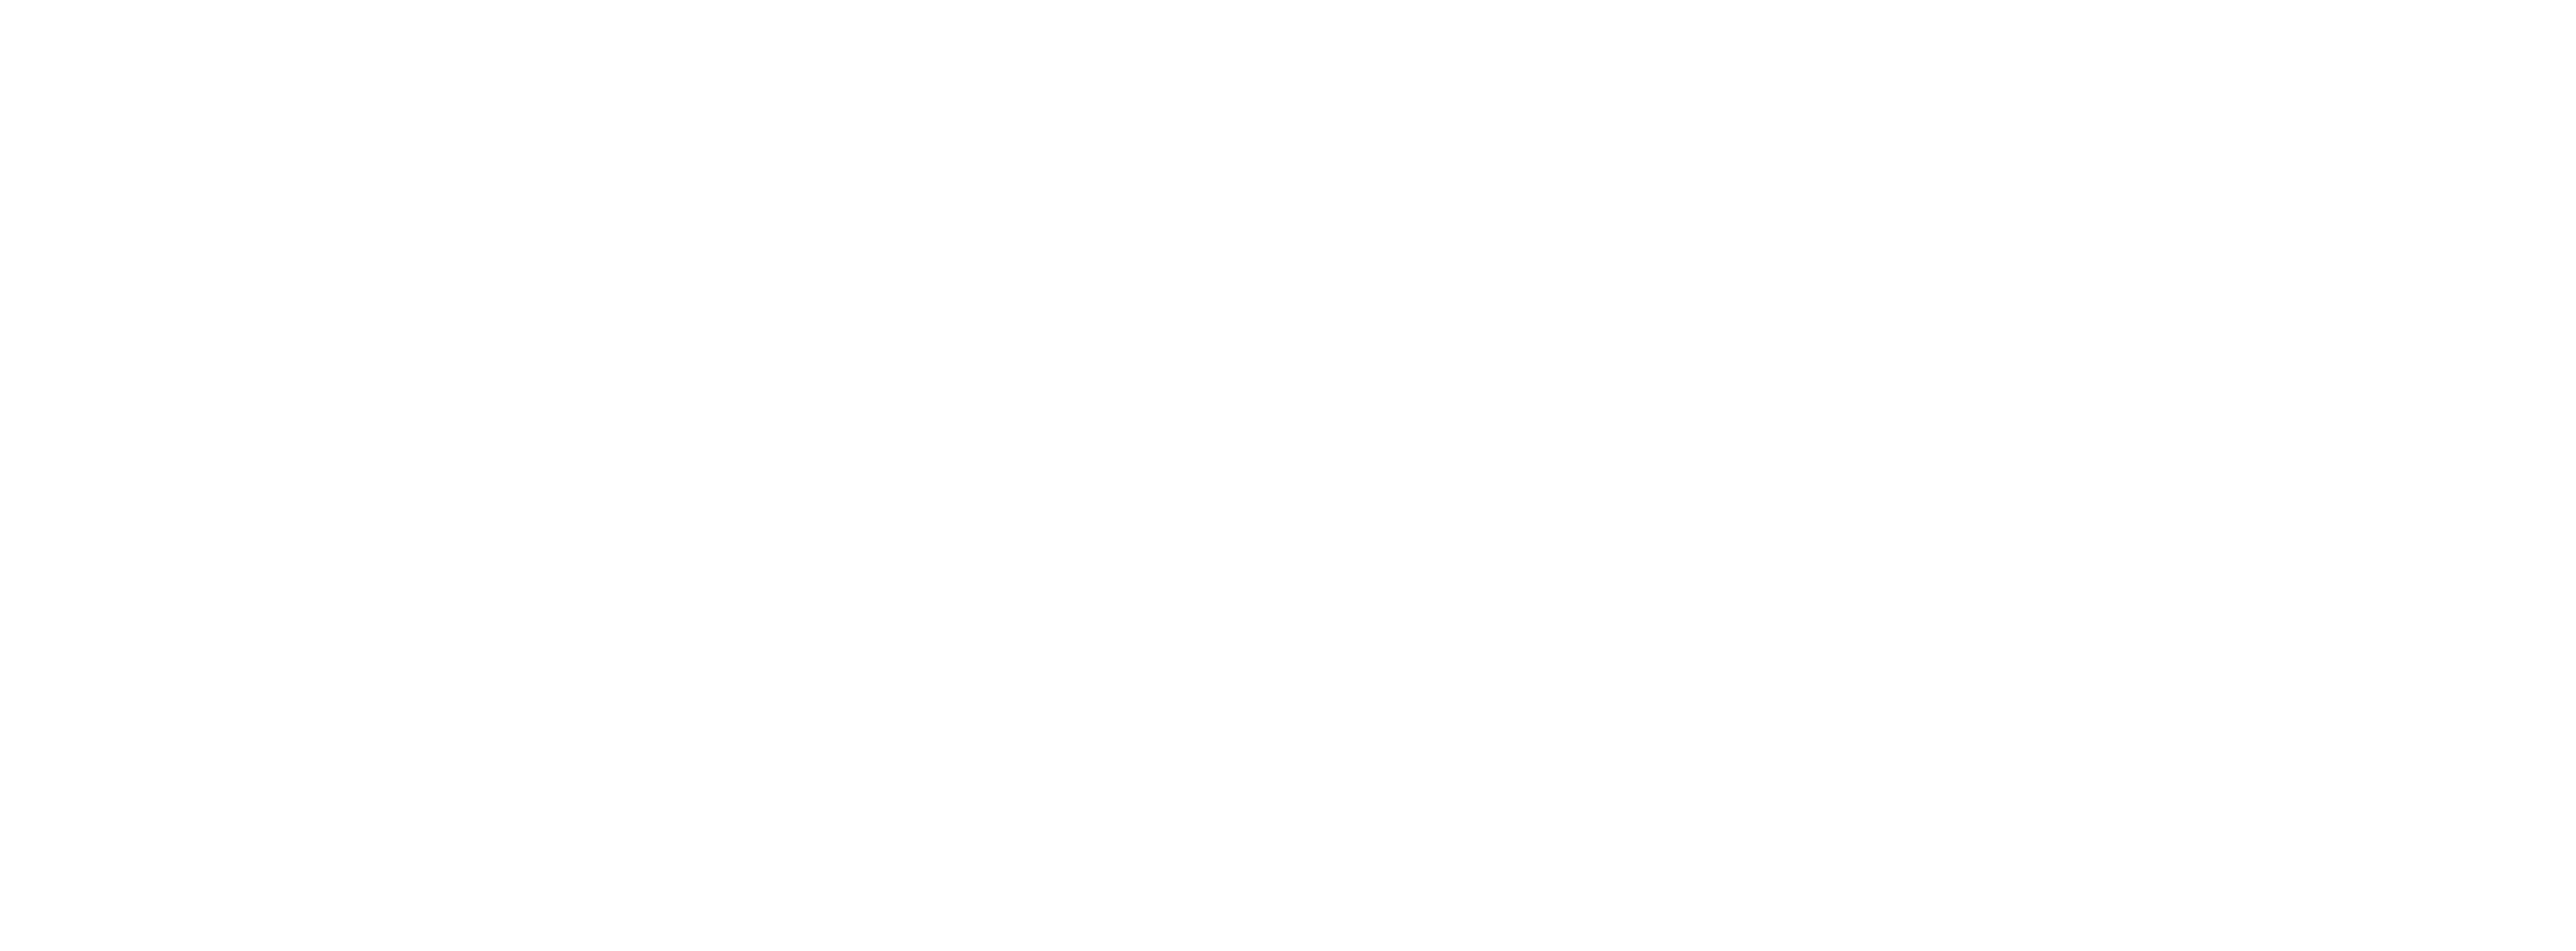 Xclusive-Muscle_white_cropped